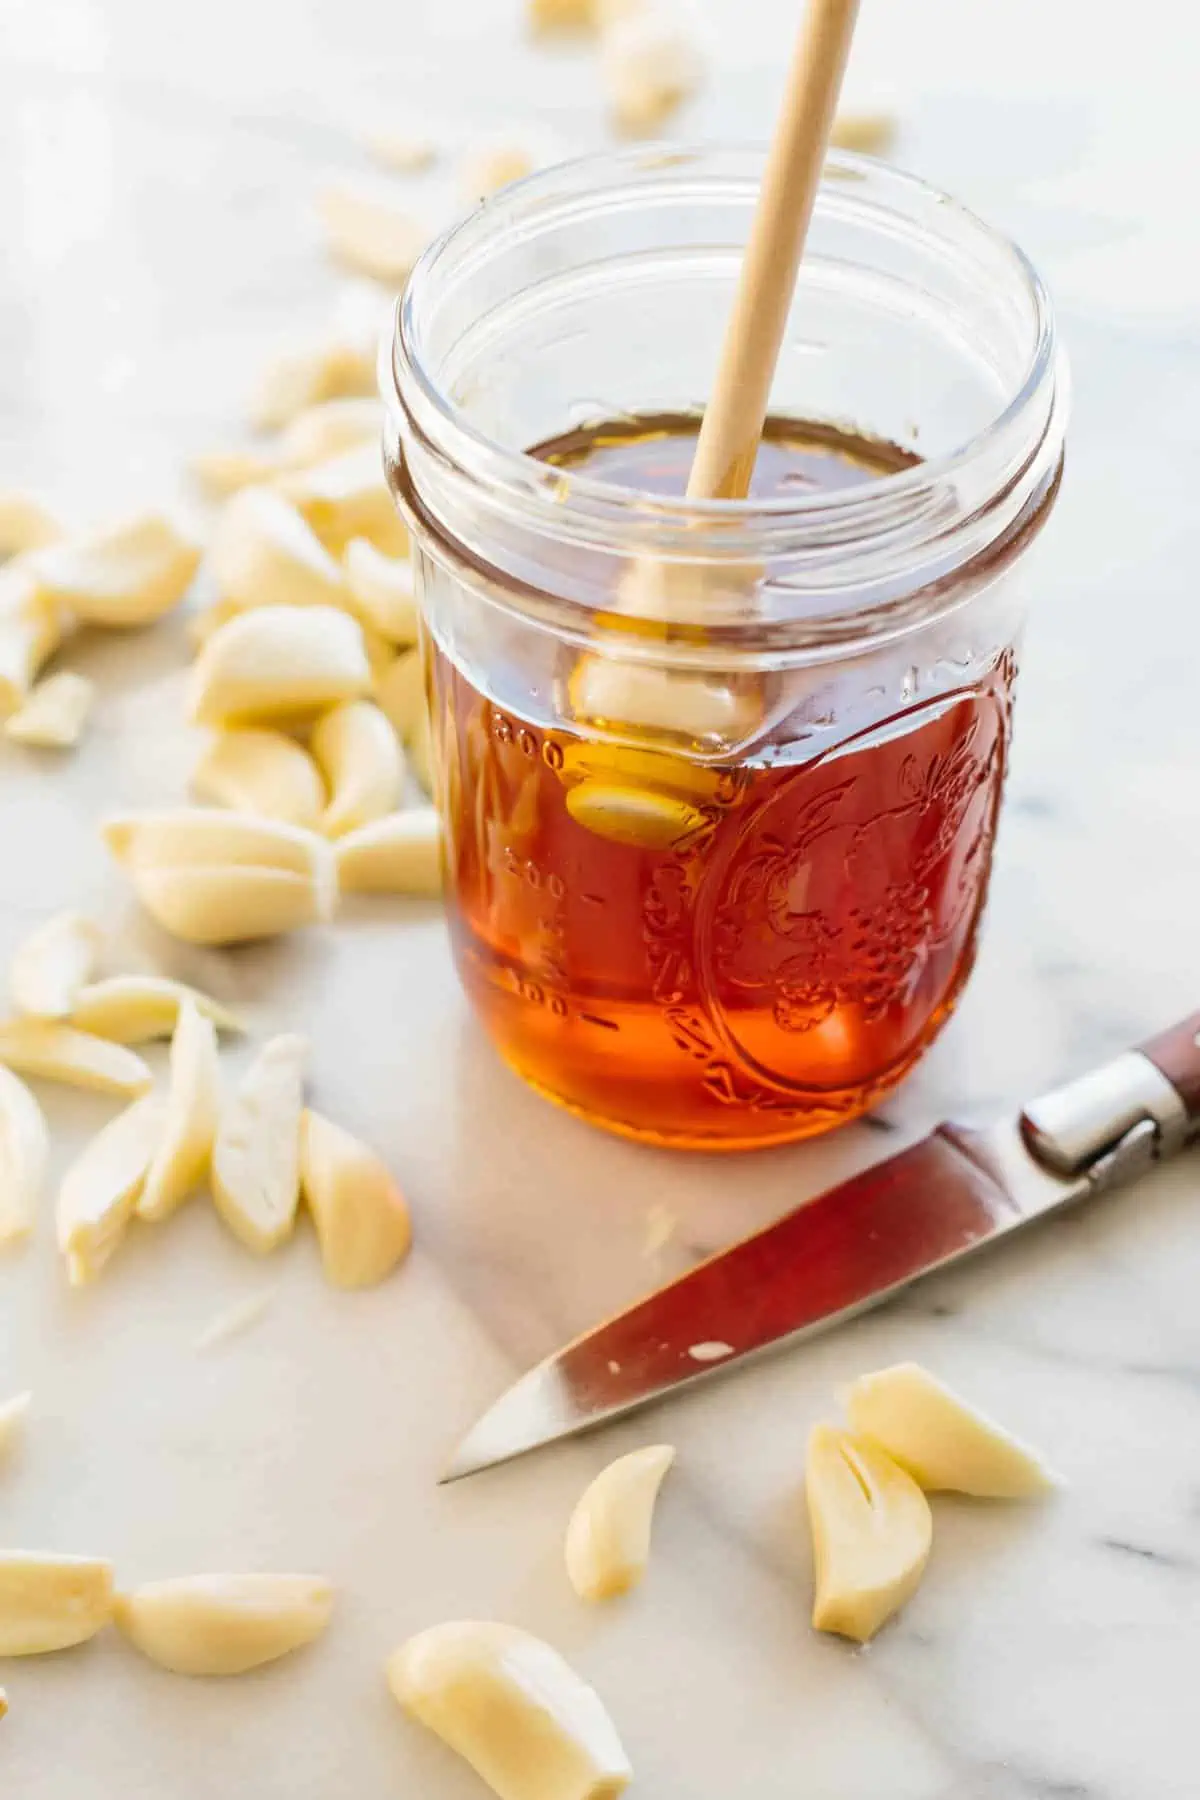 Close up of a glass pint jar of honey surrounded by peeled garlic cloves.